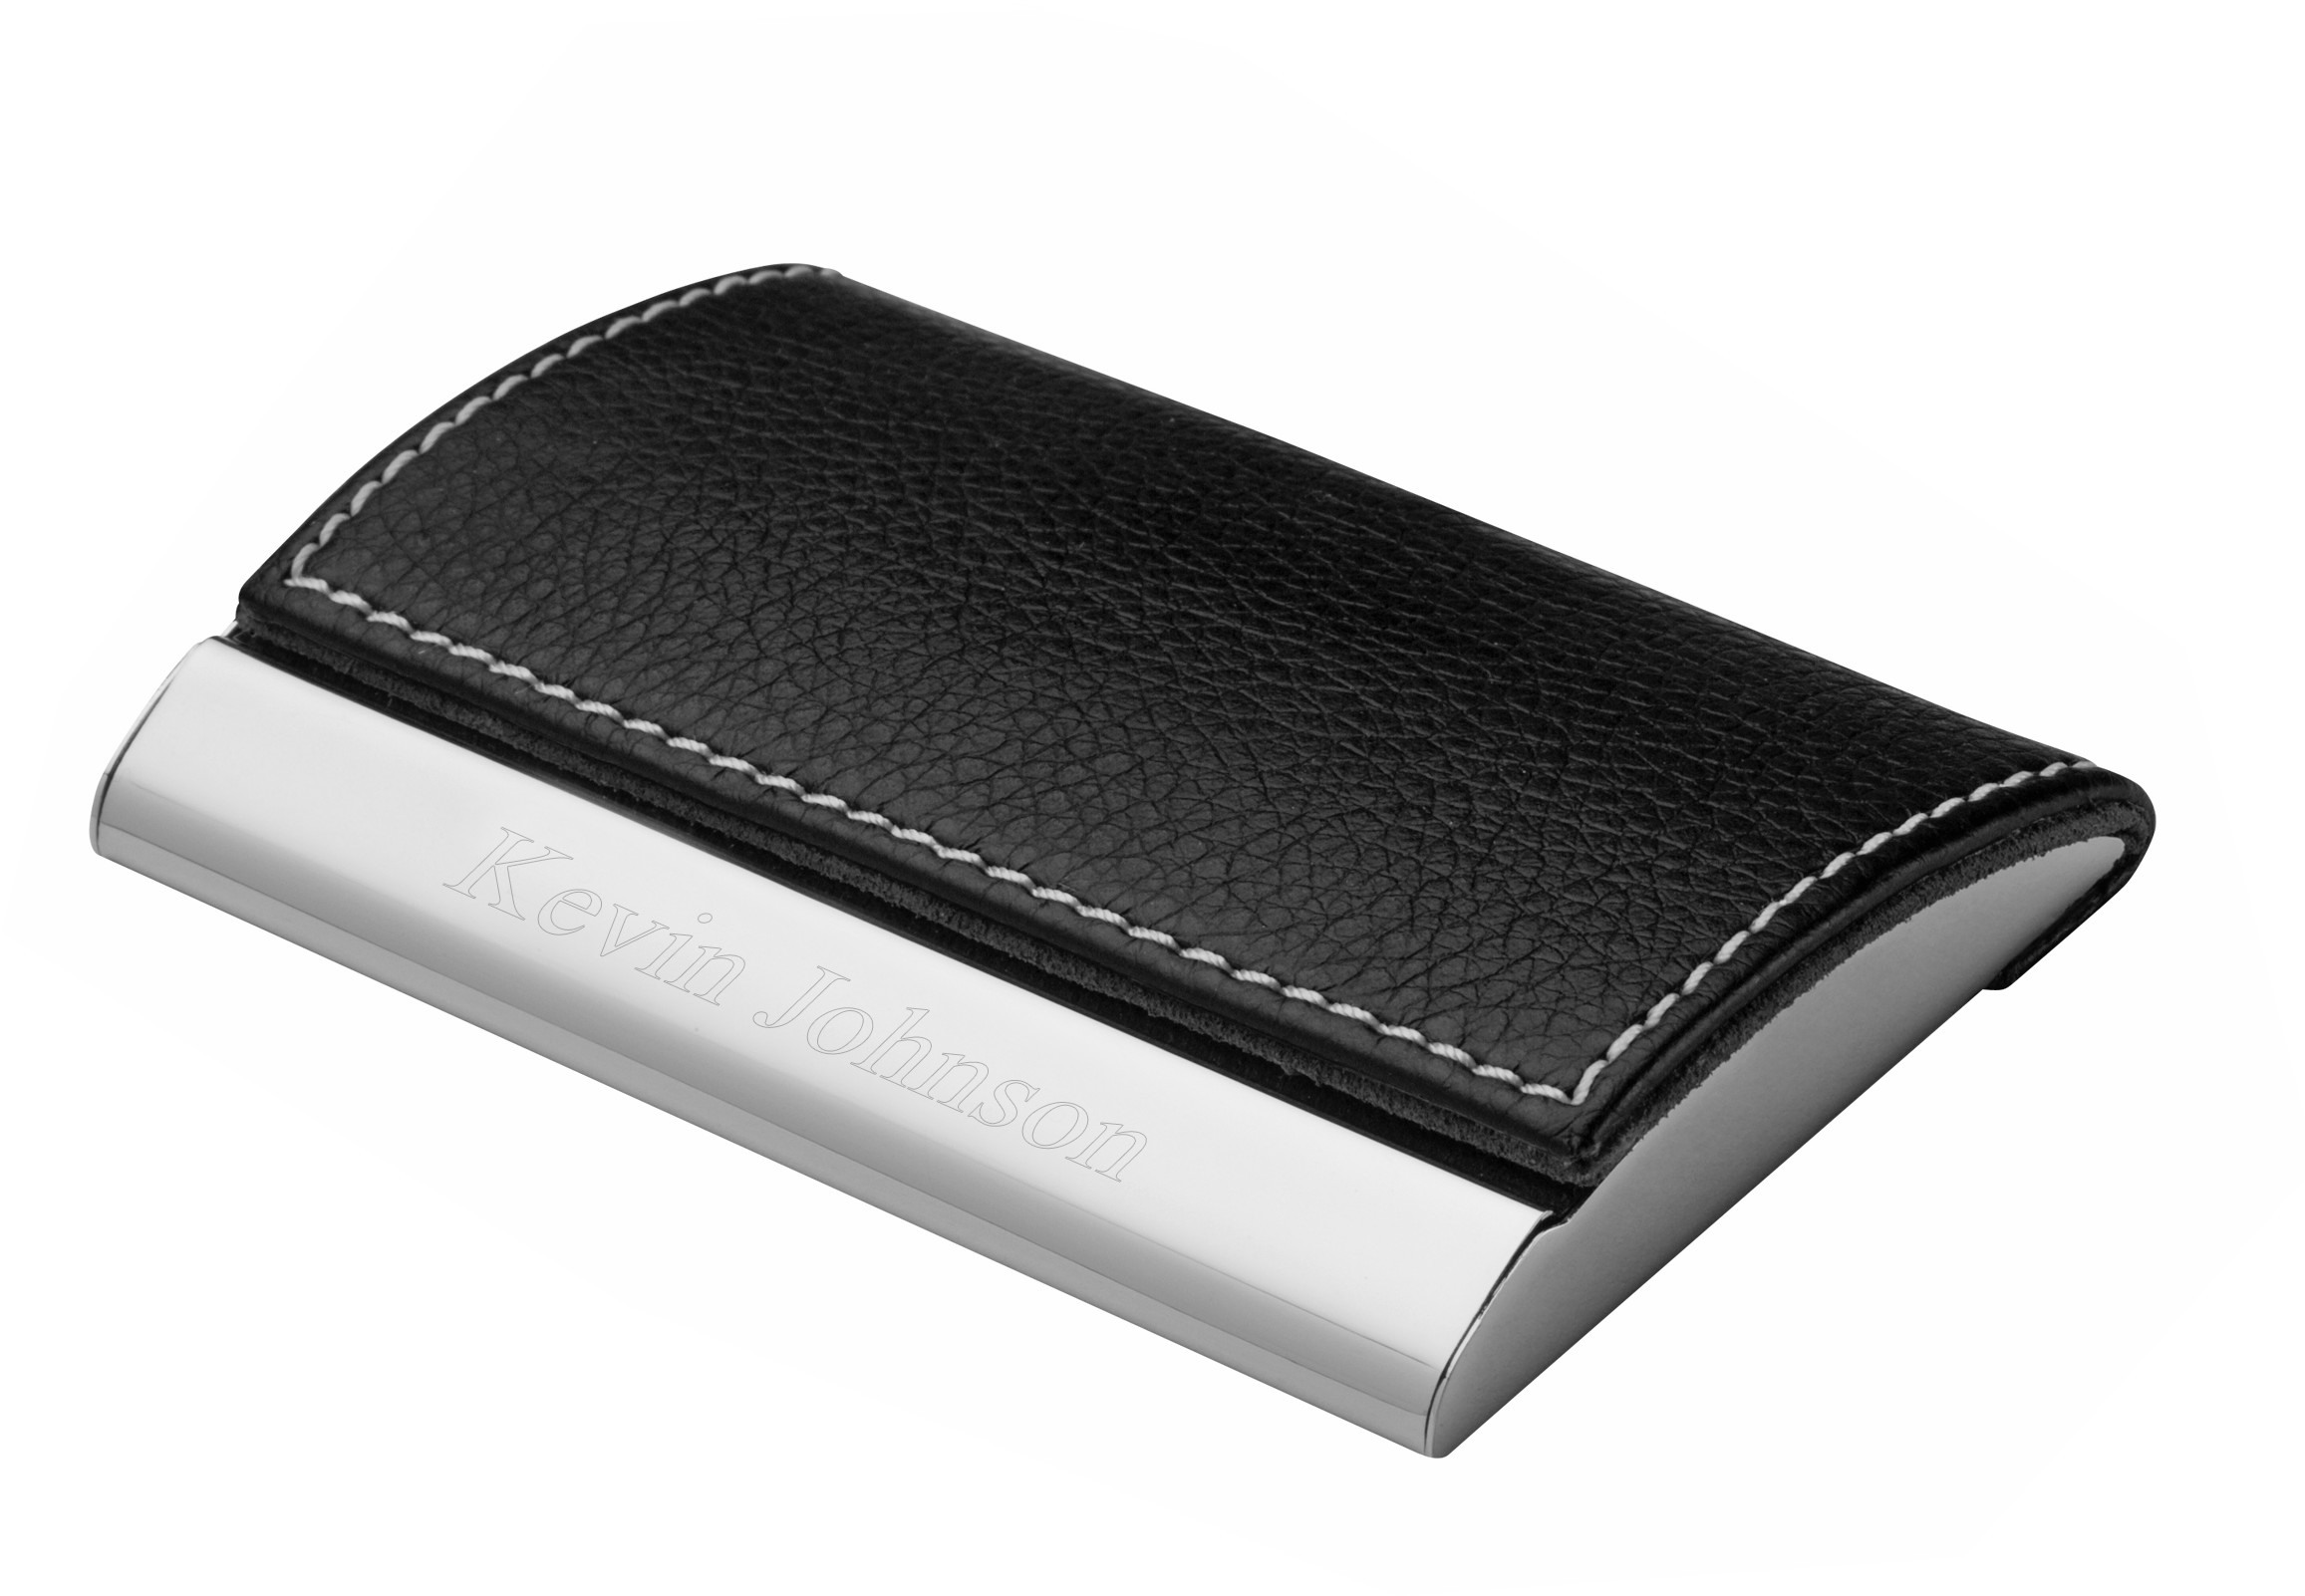 Mens Leather Business Card Wallet - Handmade Simple Slim Card Case